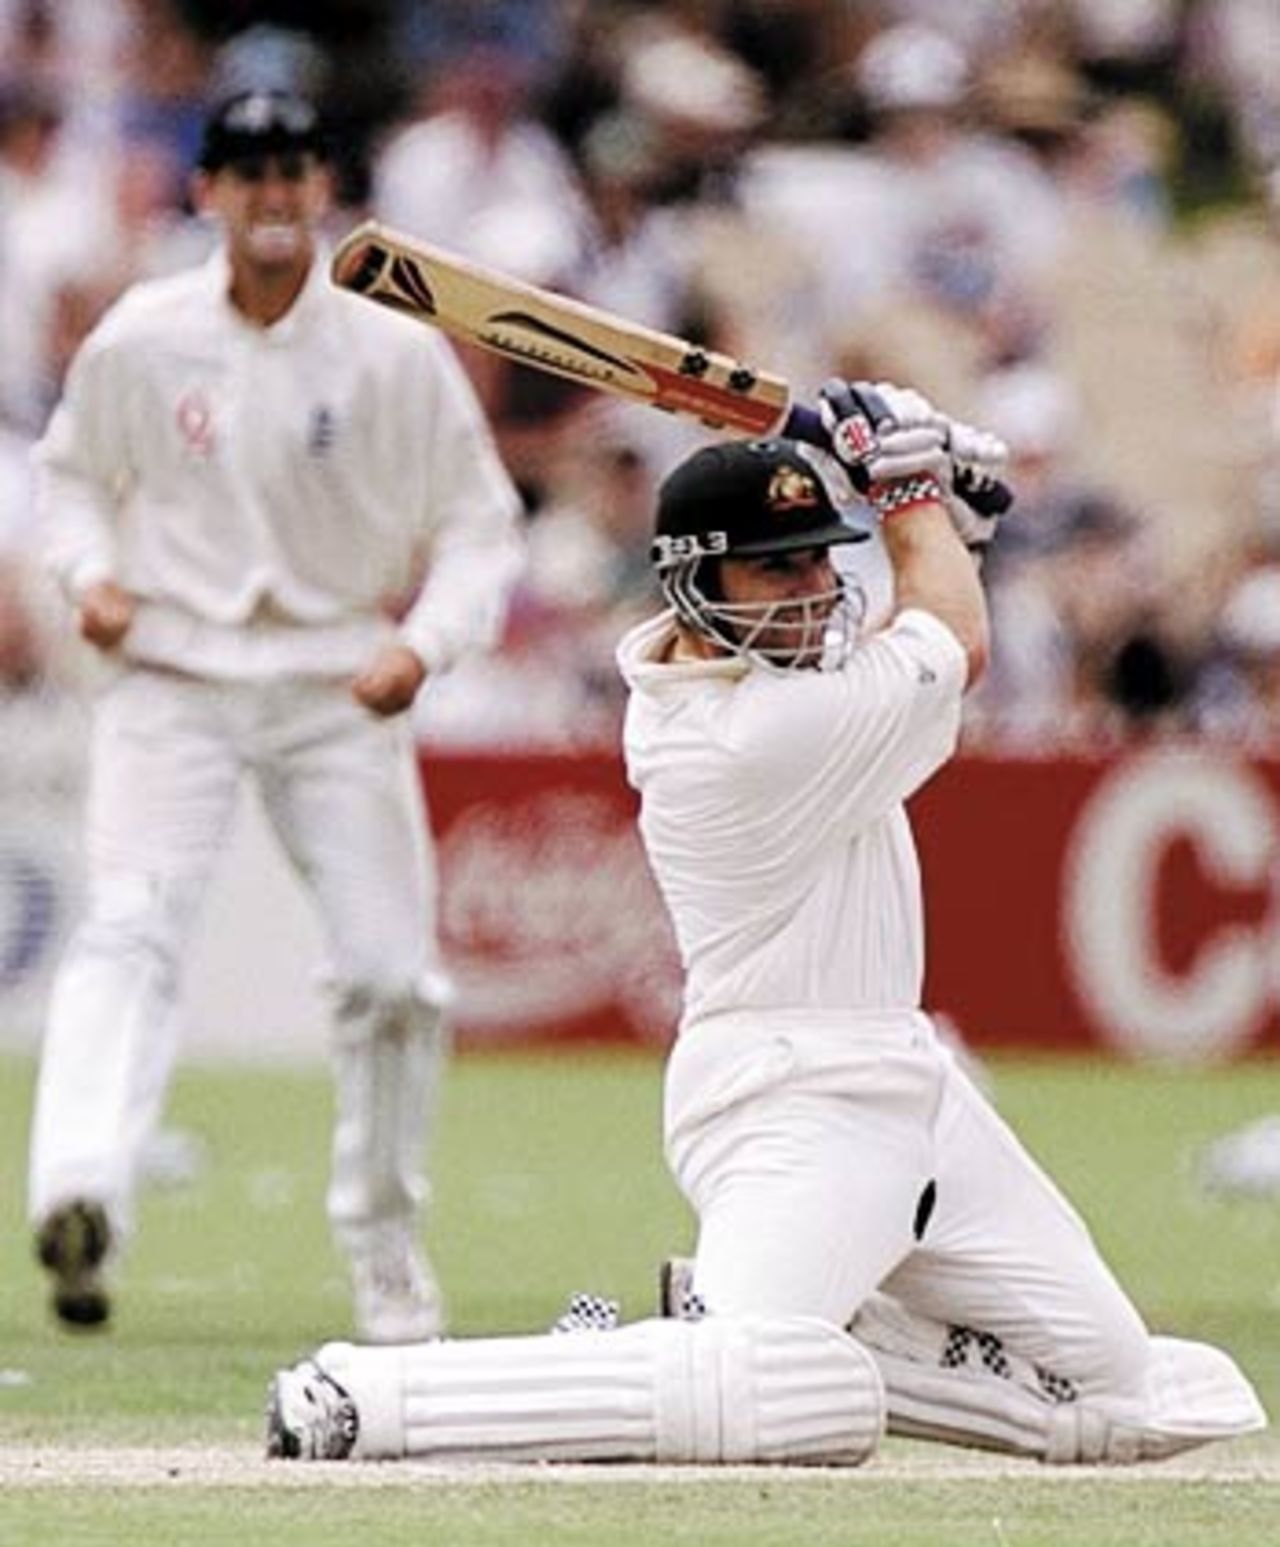 Sit and deliver at Adelaide as Australia went 2-0 up in the series, Australia v England, 3rd Test, Adelaide, December 14, 1998